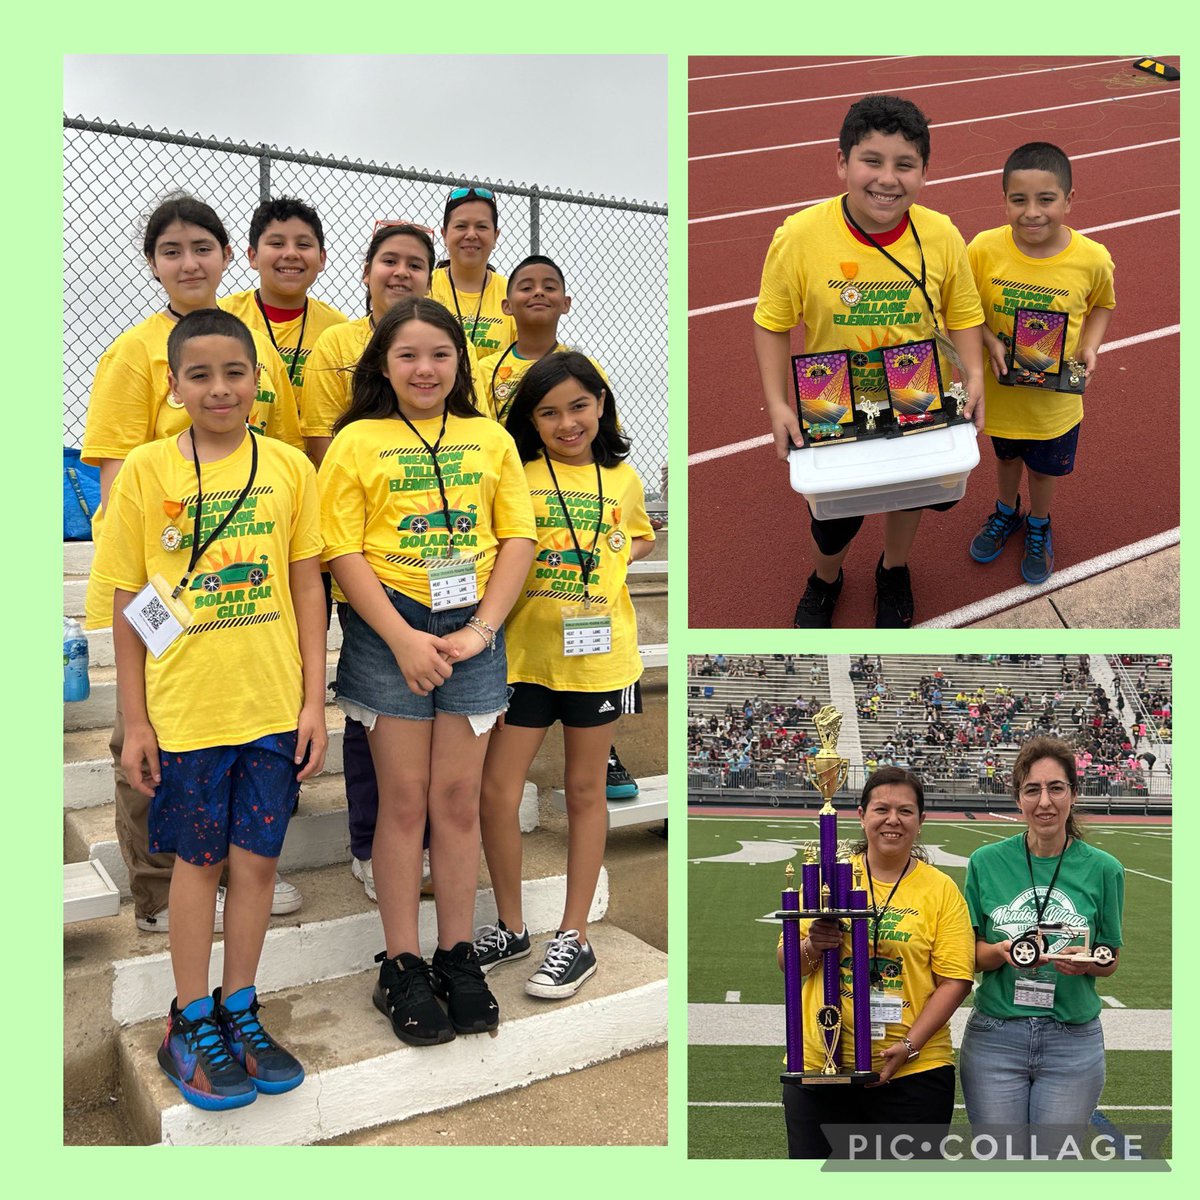 Very proud of our Bobcats for placing in the finals at the Solar Car Races this weekend! Also, for the second year in a row we won 1st place in the adult solar car race!🏆🎉@MVE_GT @NISDSTEMLabs @NISDMeadowVill